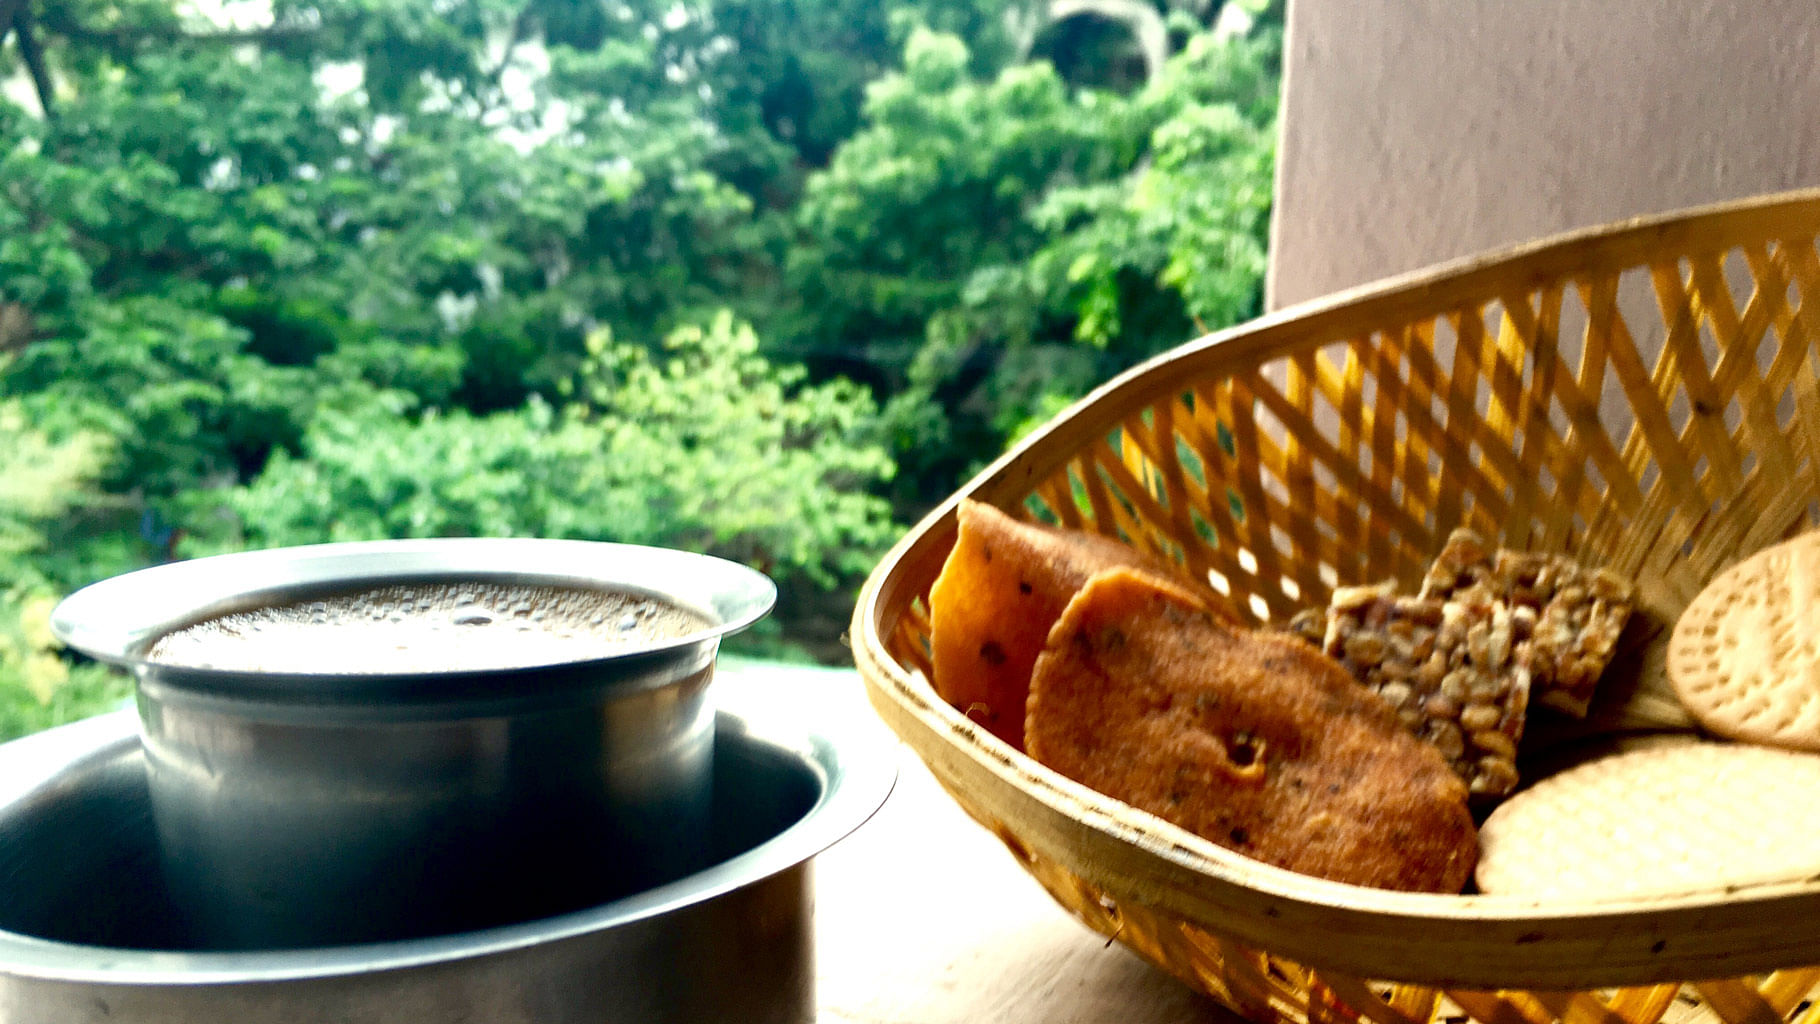 Filter Coffee, <i>Thattai, </i>groundnut burfi and biscuits. On the balcony. Sigh. (Photo: Vikram Venkateswaran, who has emptied the contents of the photo)